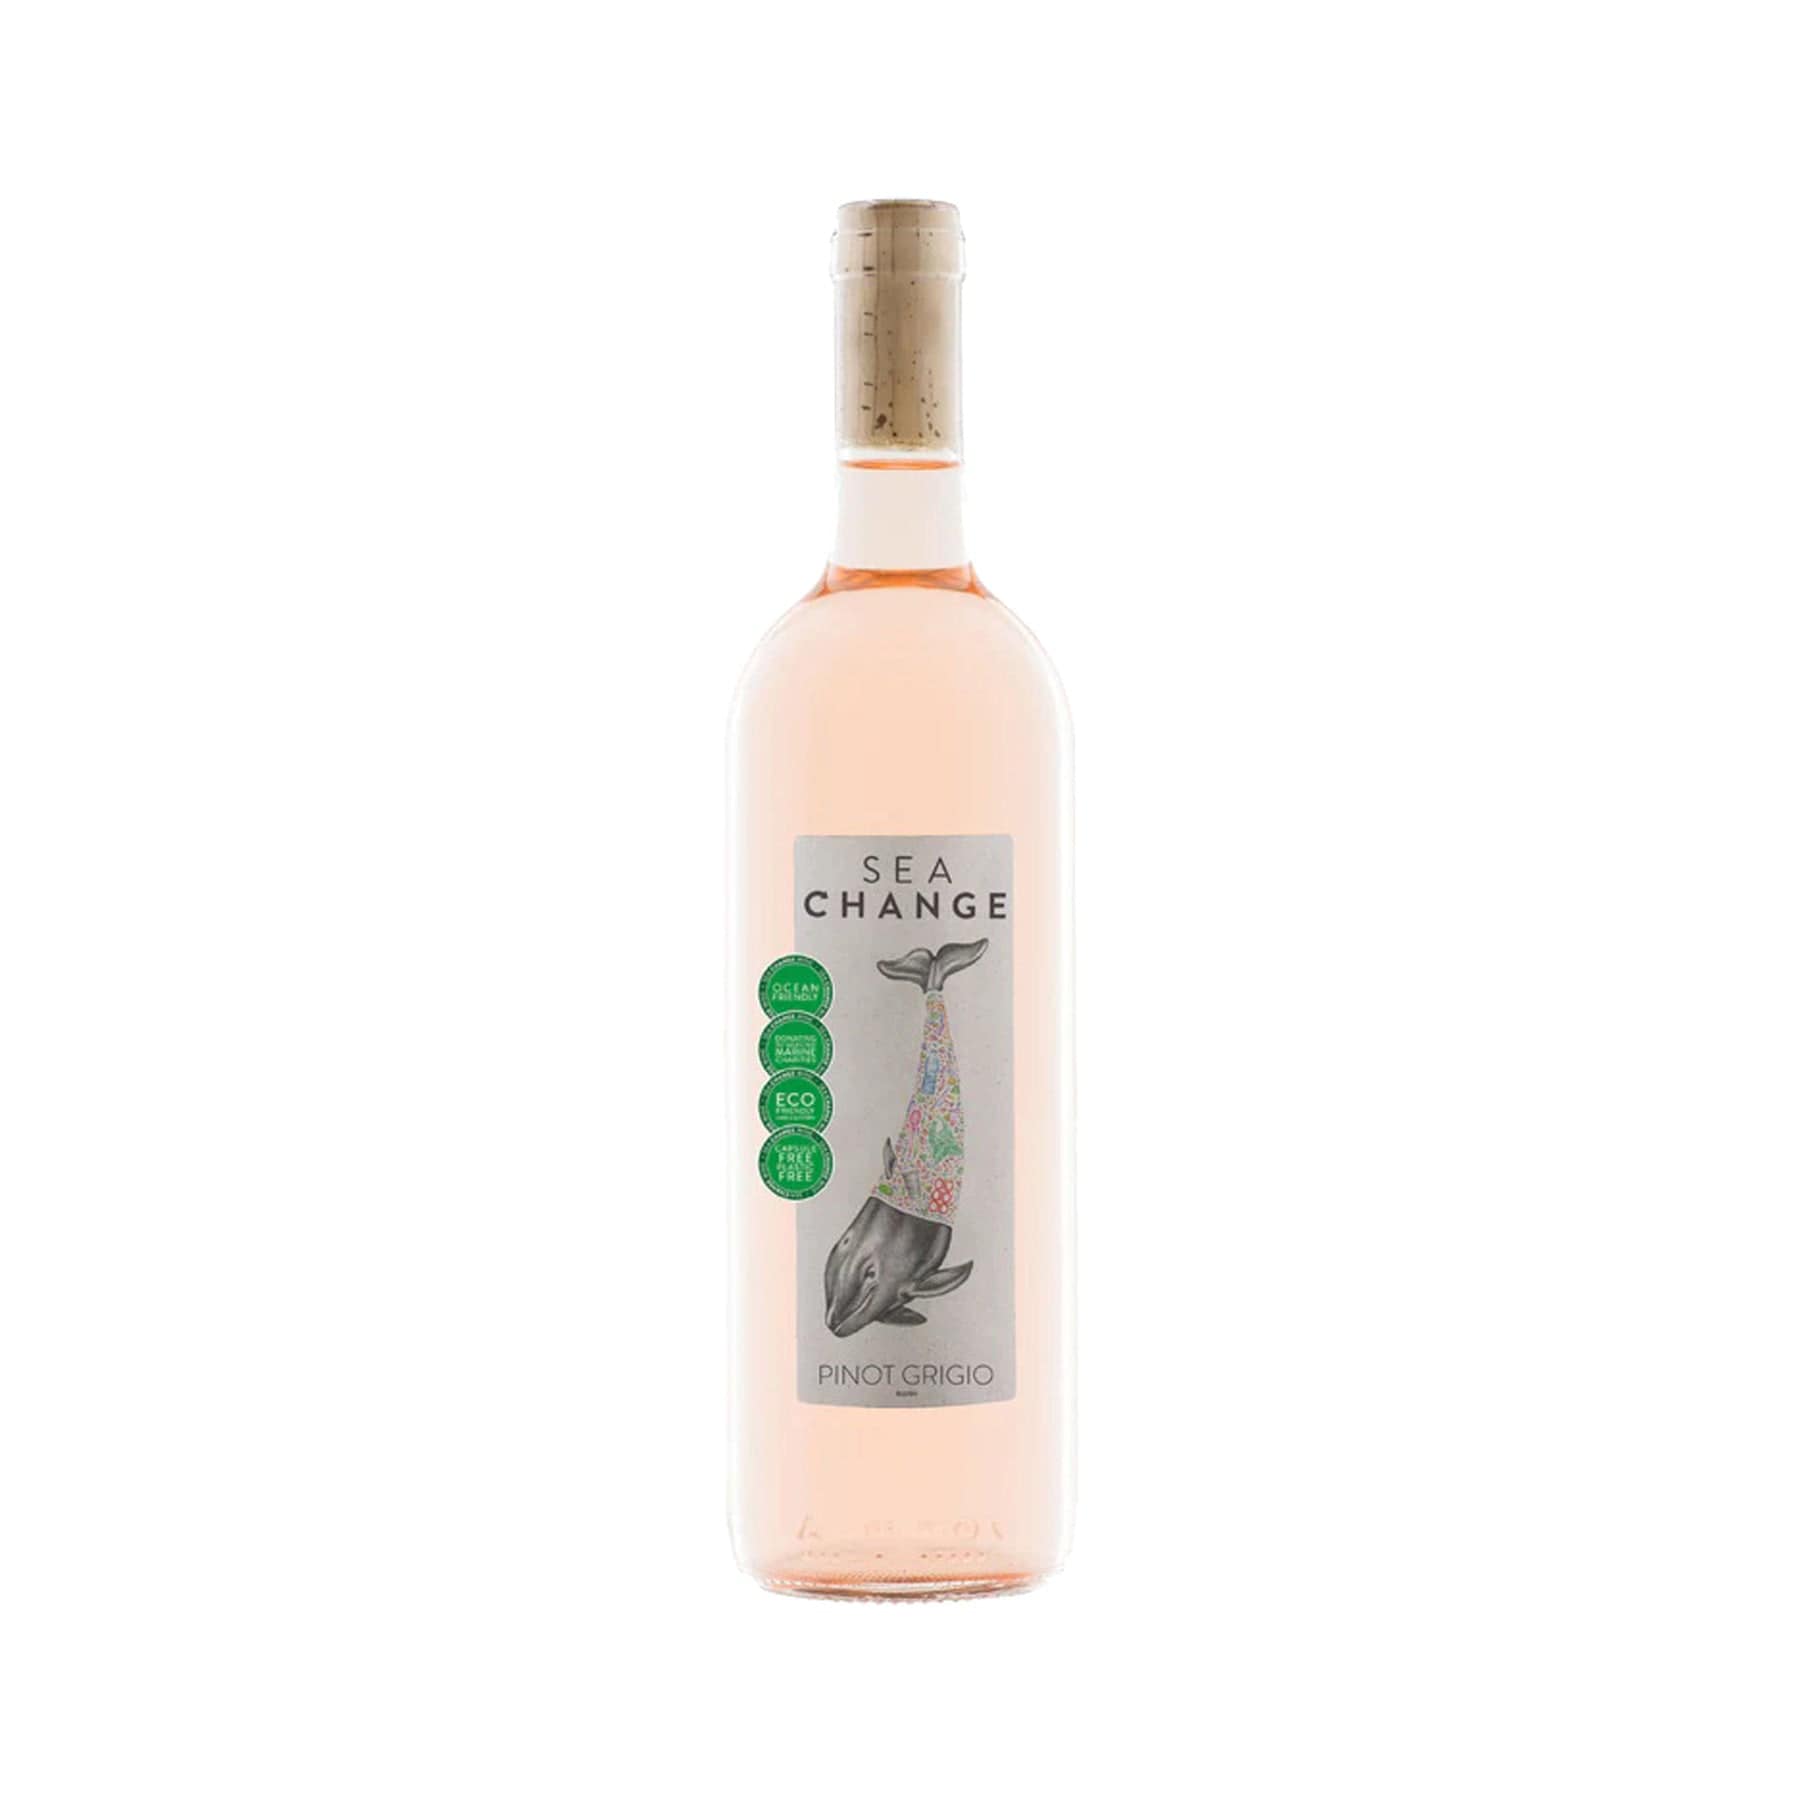 Eco-friendly Sea Change rosé wine bottle, Pinot Grigio variety, with dolphin label design, isolated on white background.